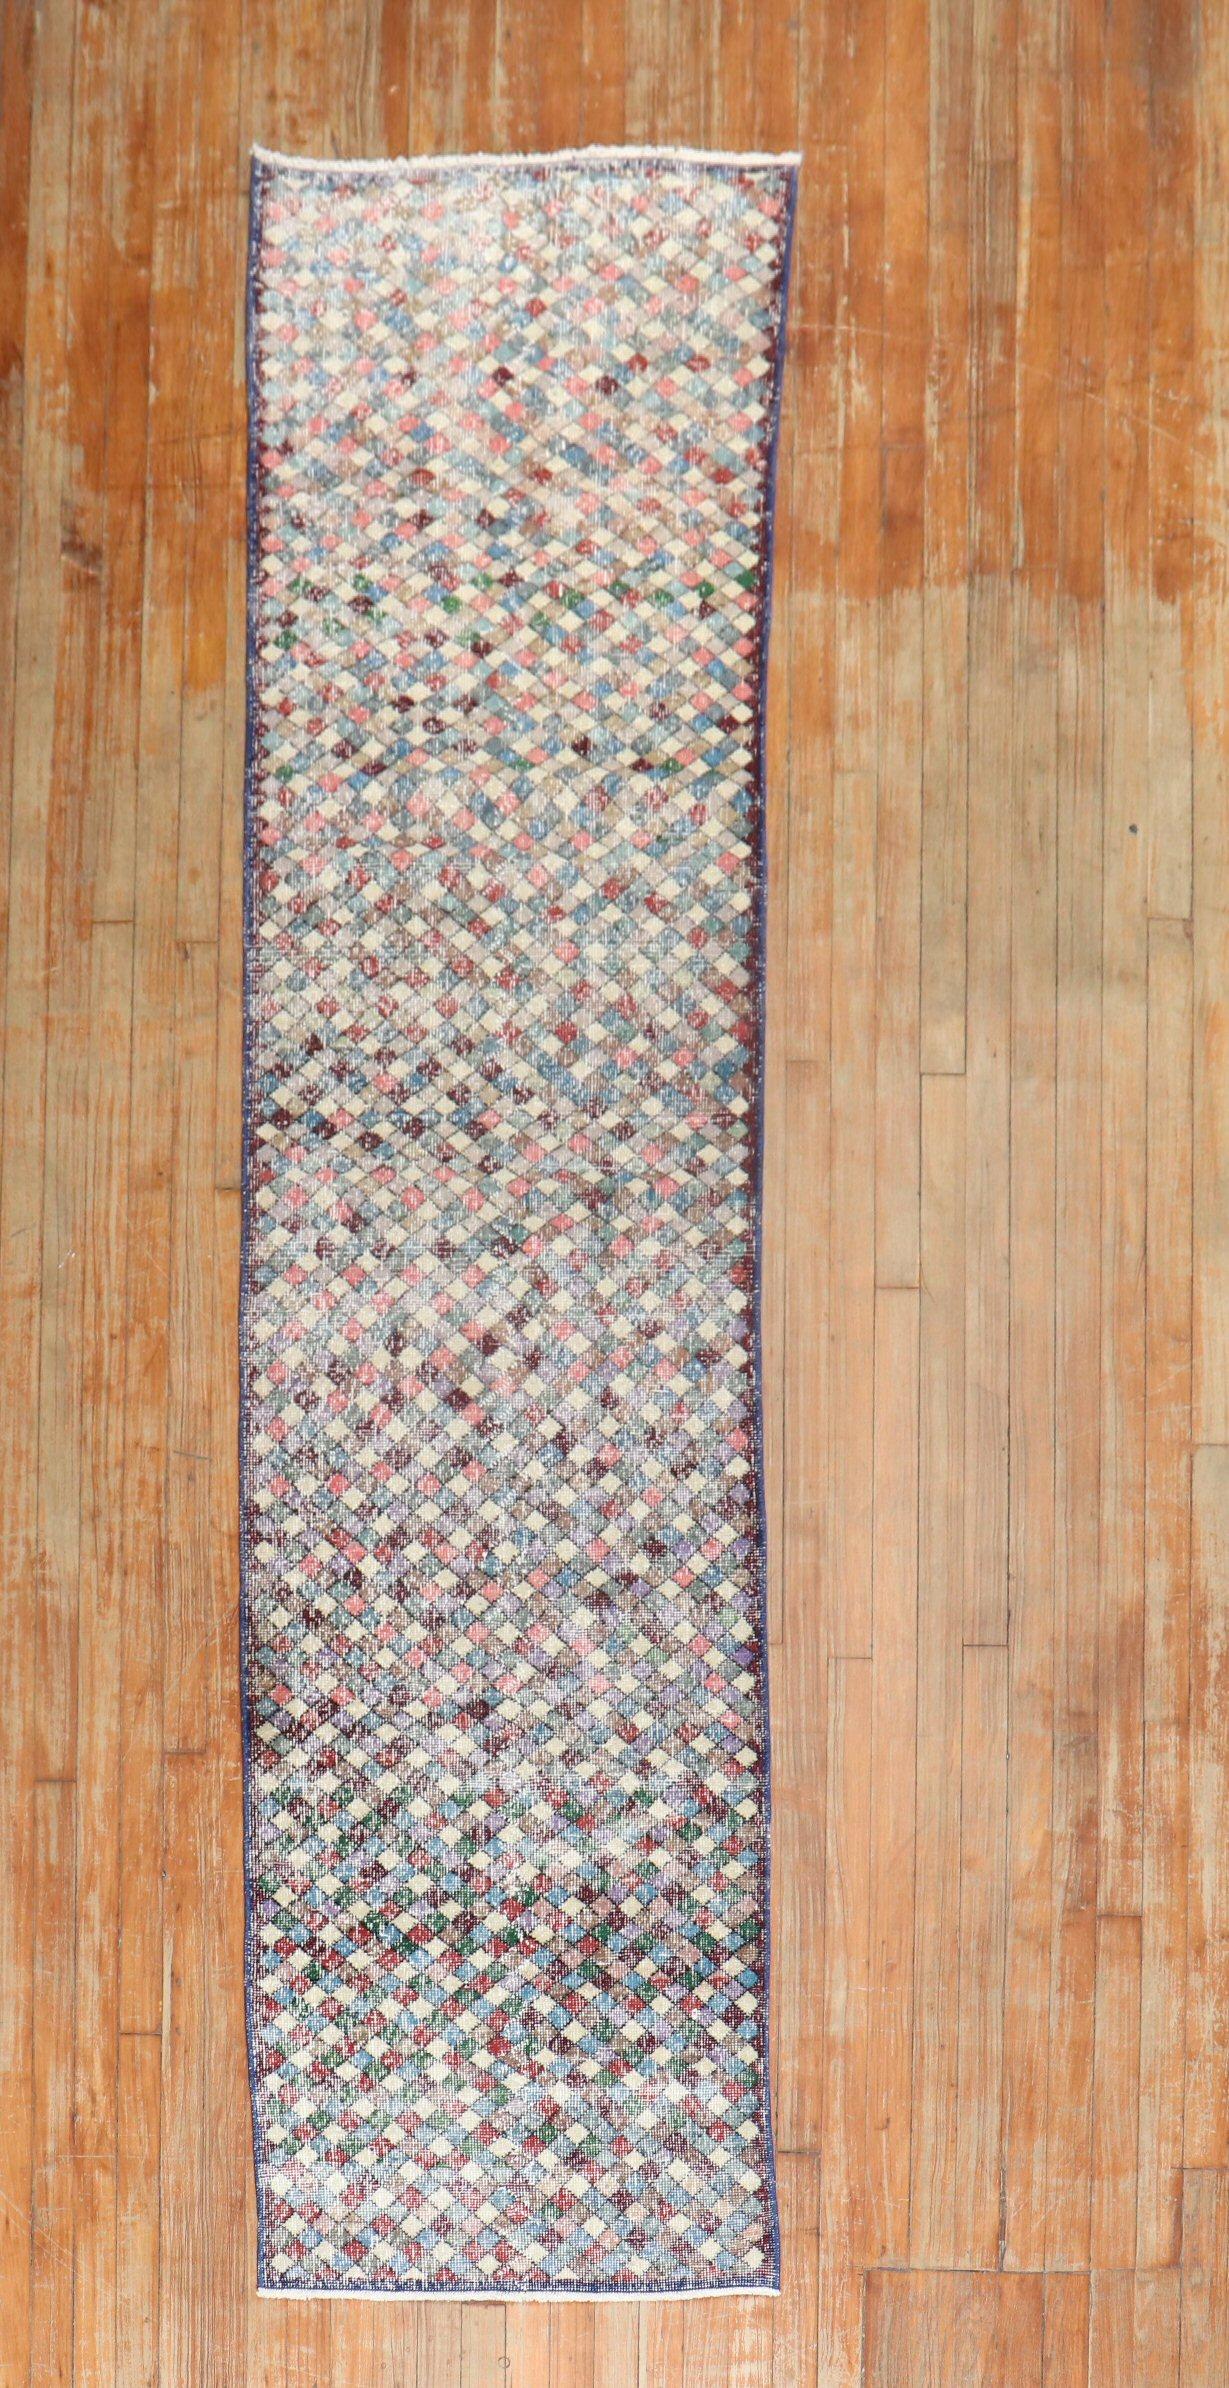 A mid-20th worn century Turkish Deco runner with an all-over repetitive diamond motif throughout.

Measures: 2'3'' x 10'5''.